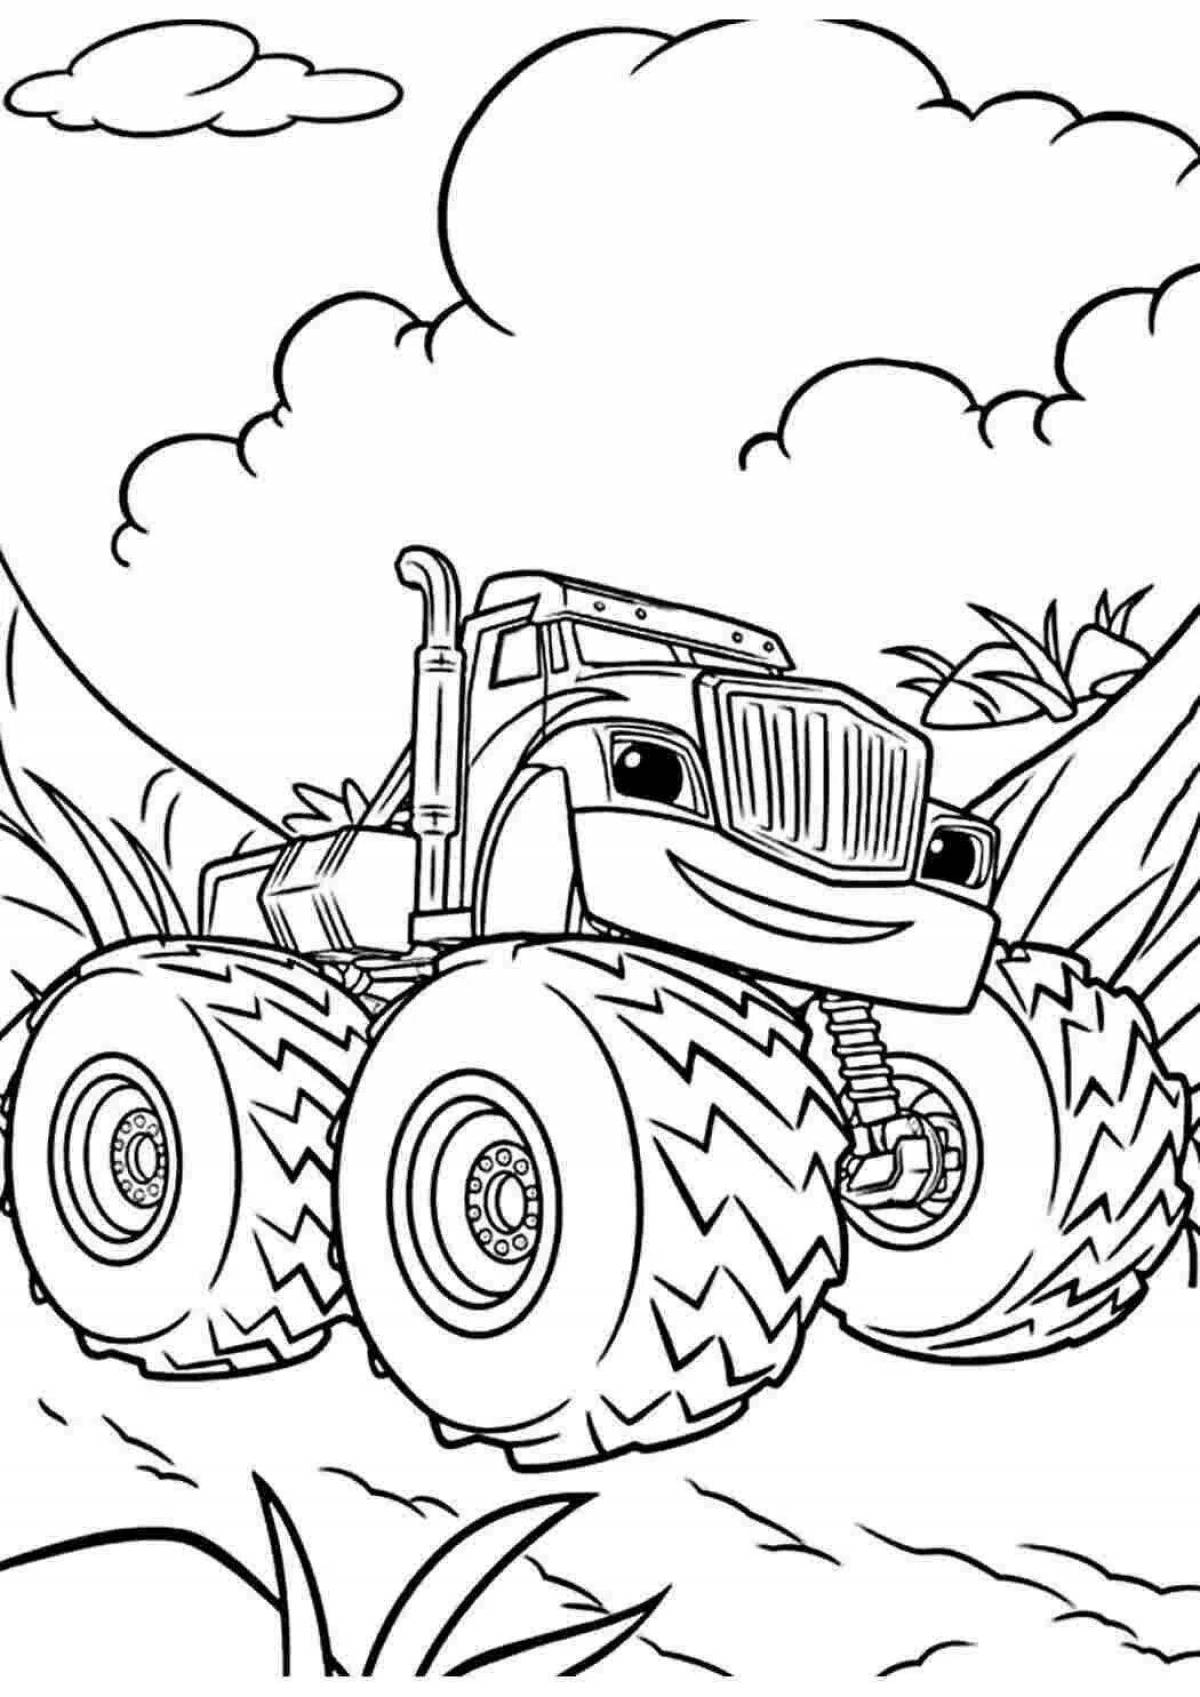 Playful Wonder Cars coloring pages for kids